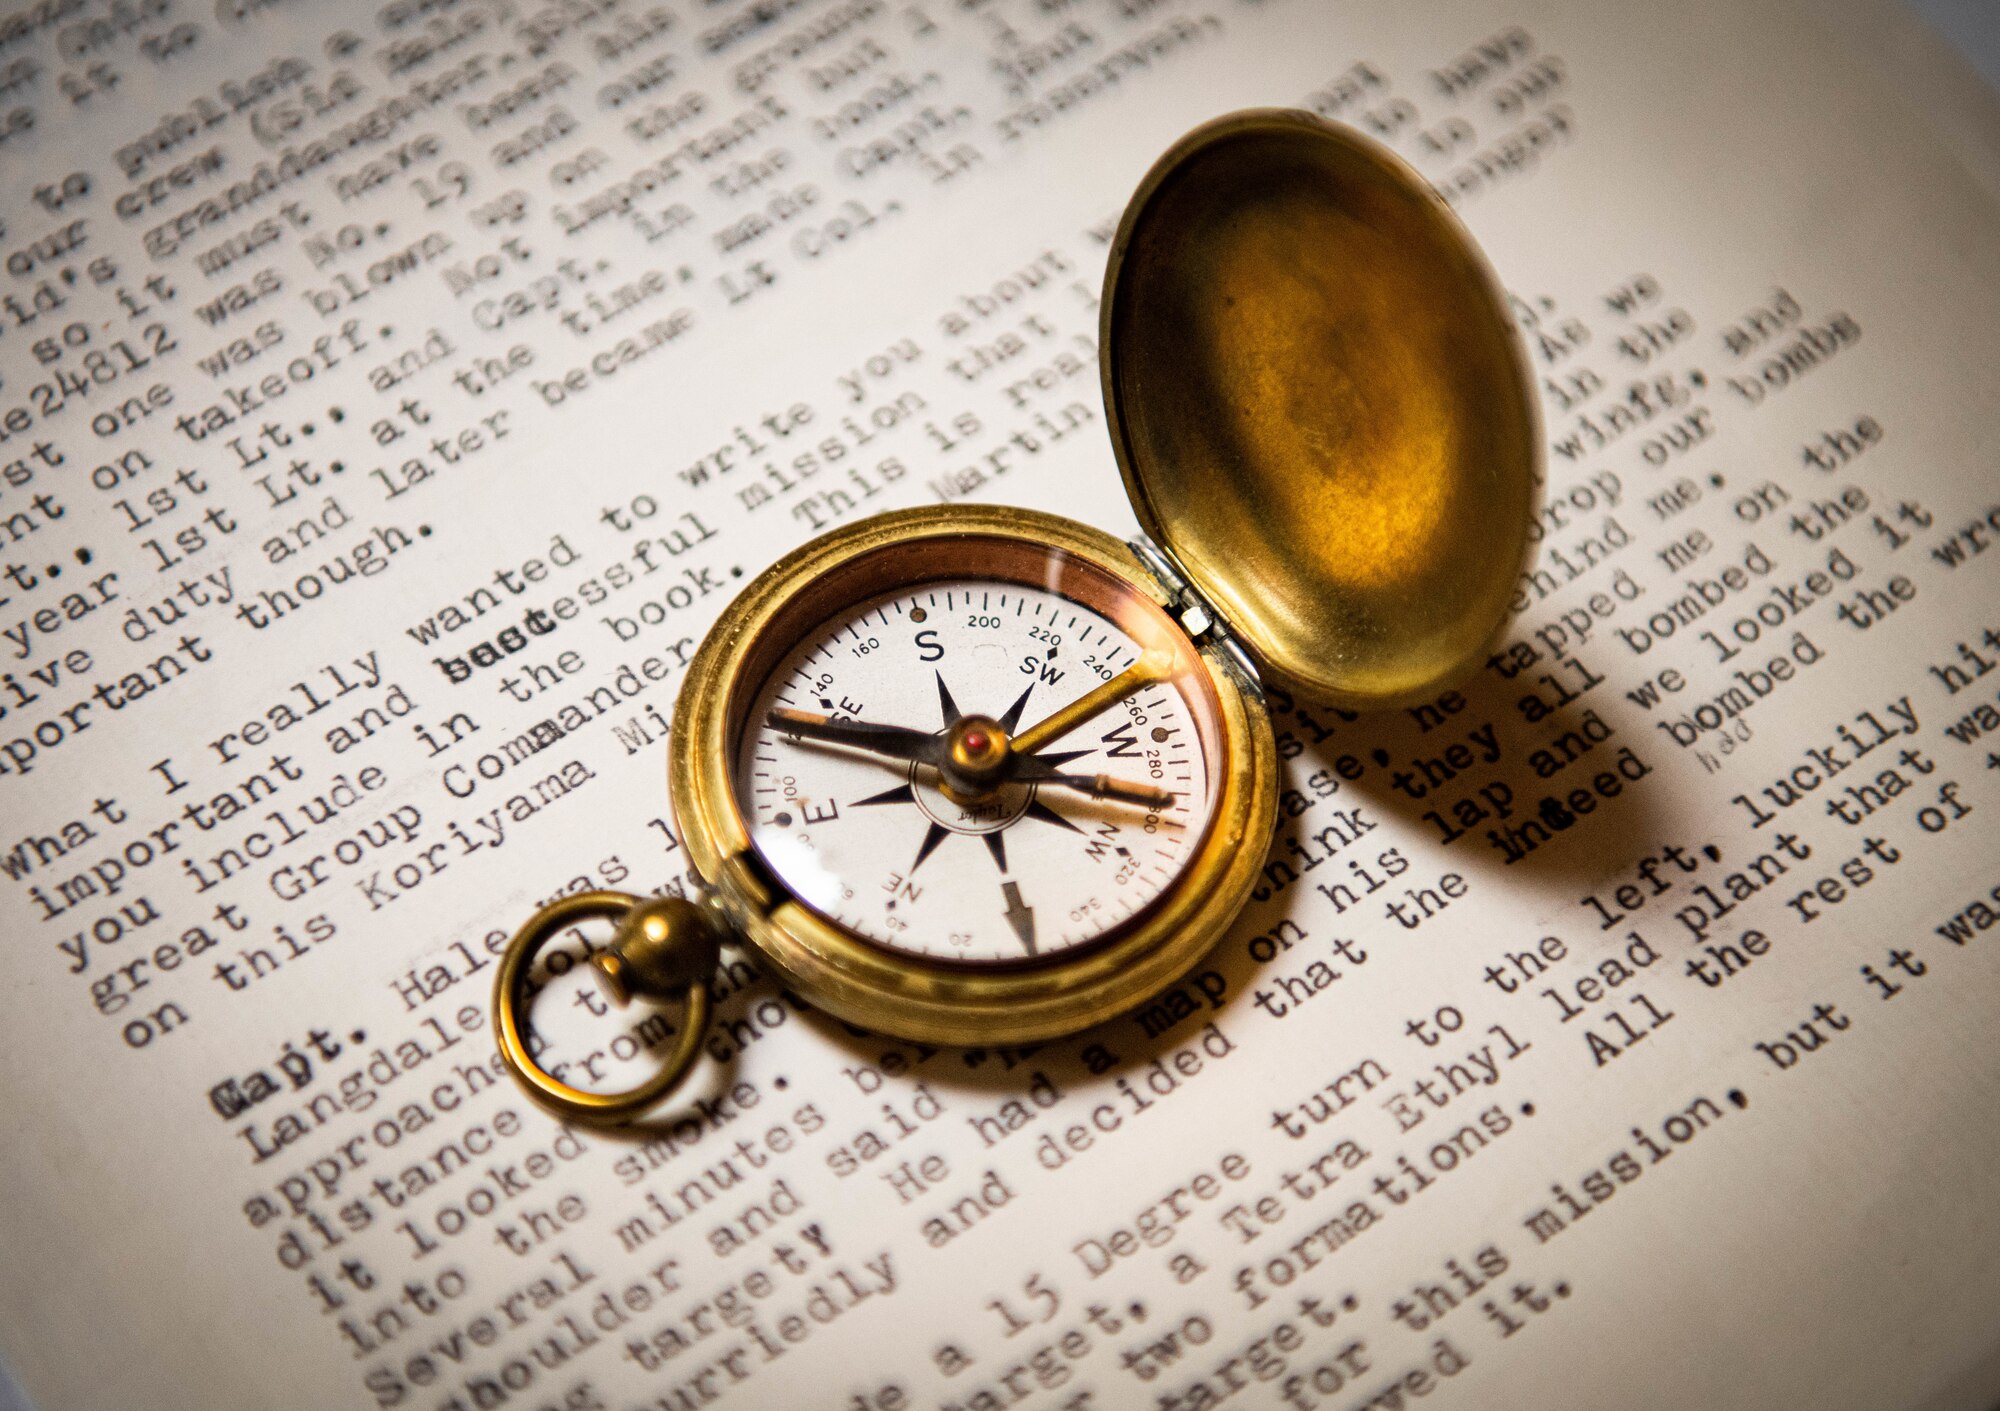 A compass sits on a letter Aug. 12, 2020, in Sun City, Ariz.